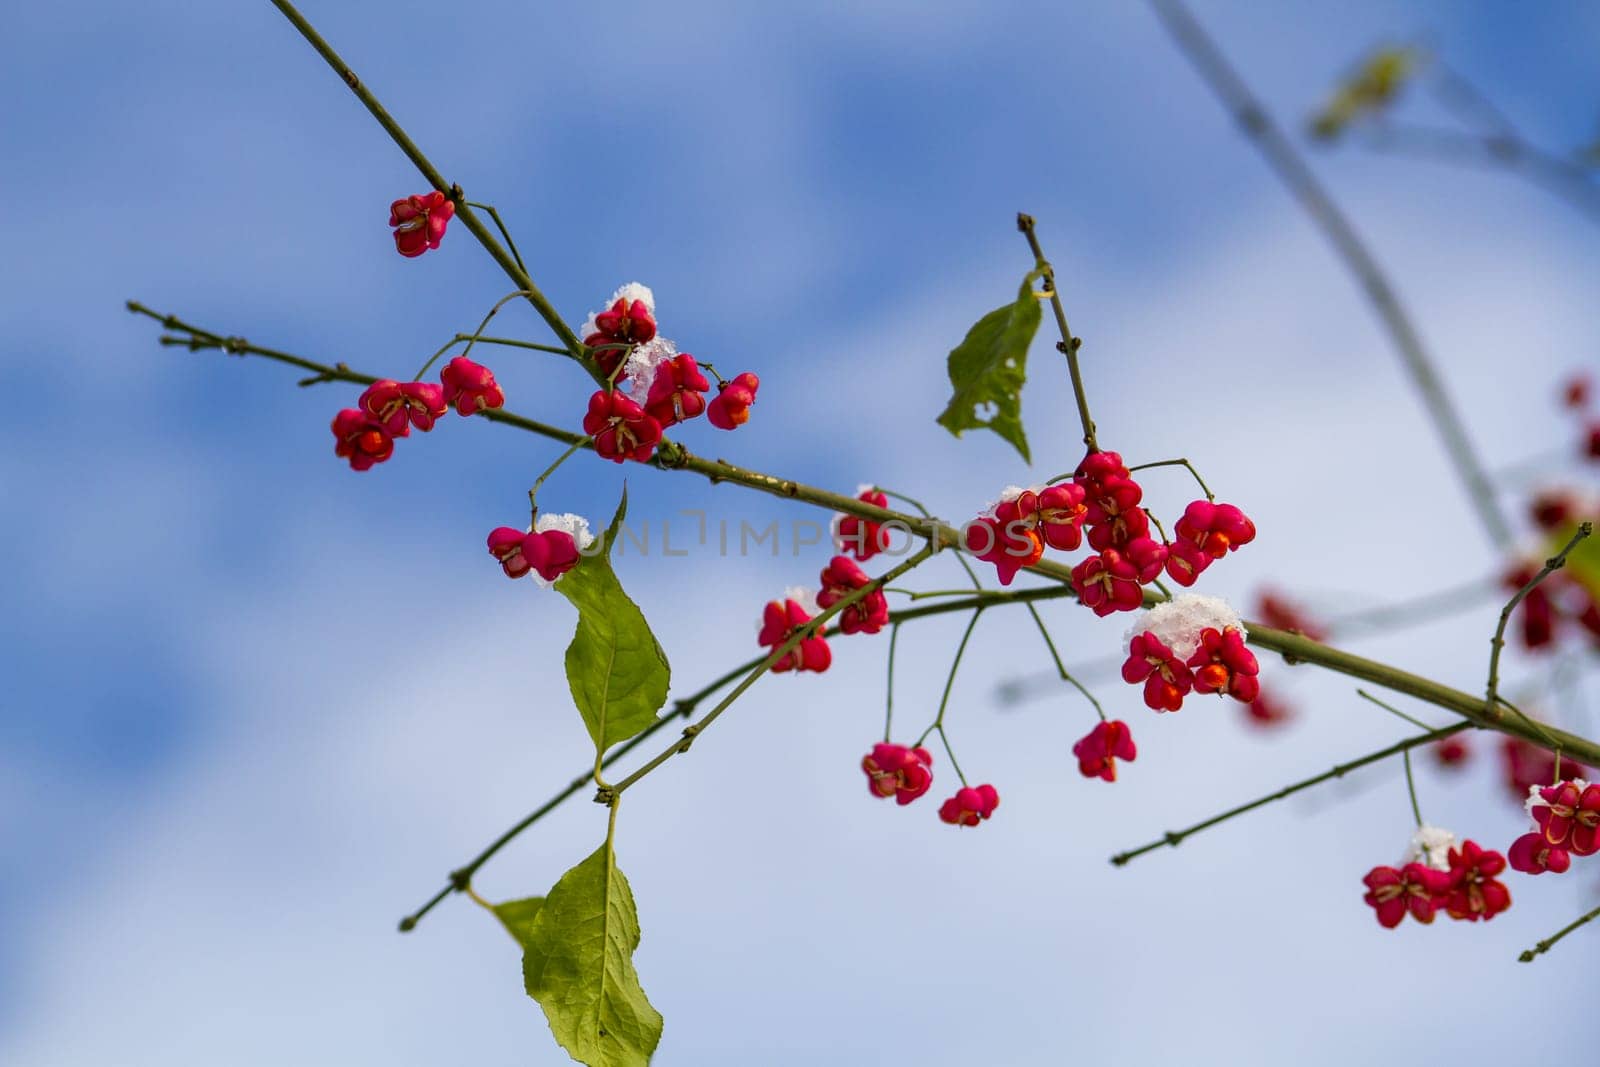 The Fruits of the European Spindle Tree by Maksym